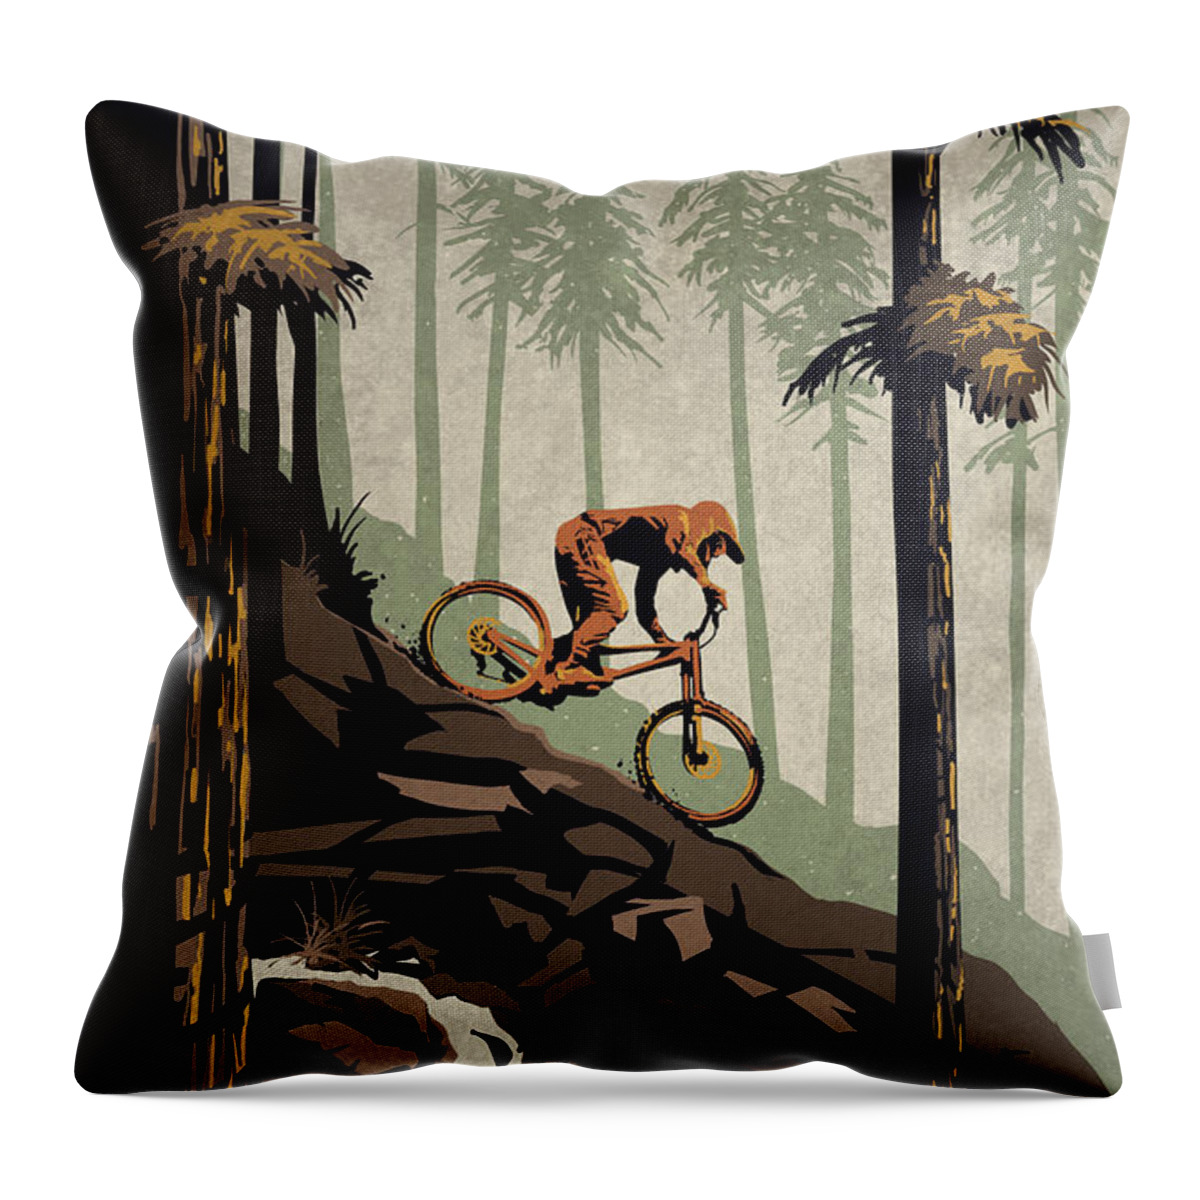  Throw Pillow featuring the painting Think outside no slogan by Sassan Filsoof